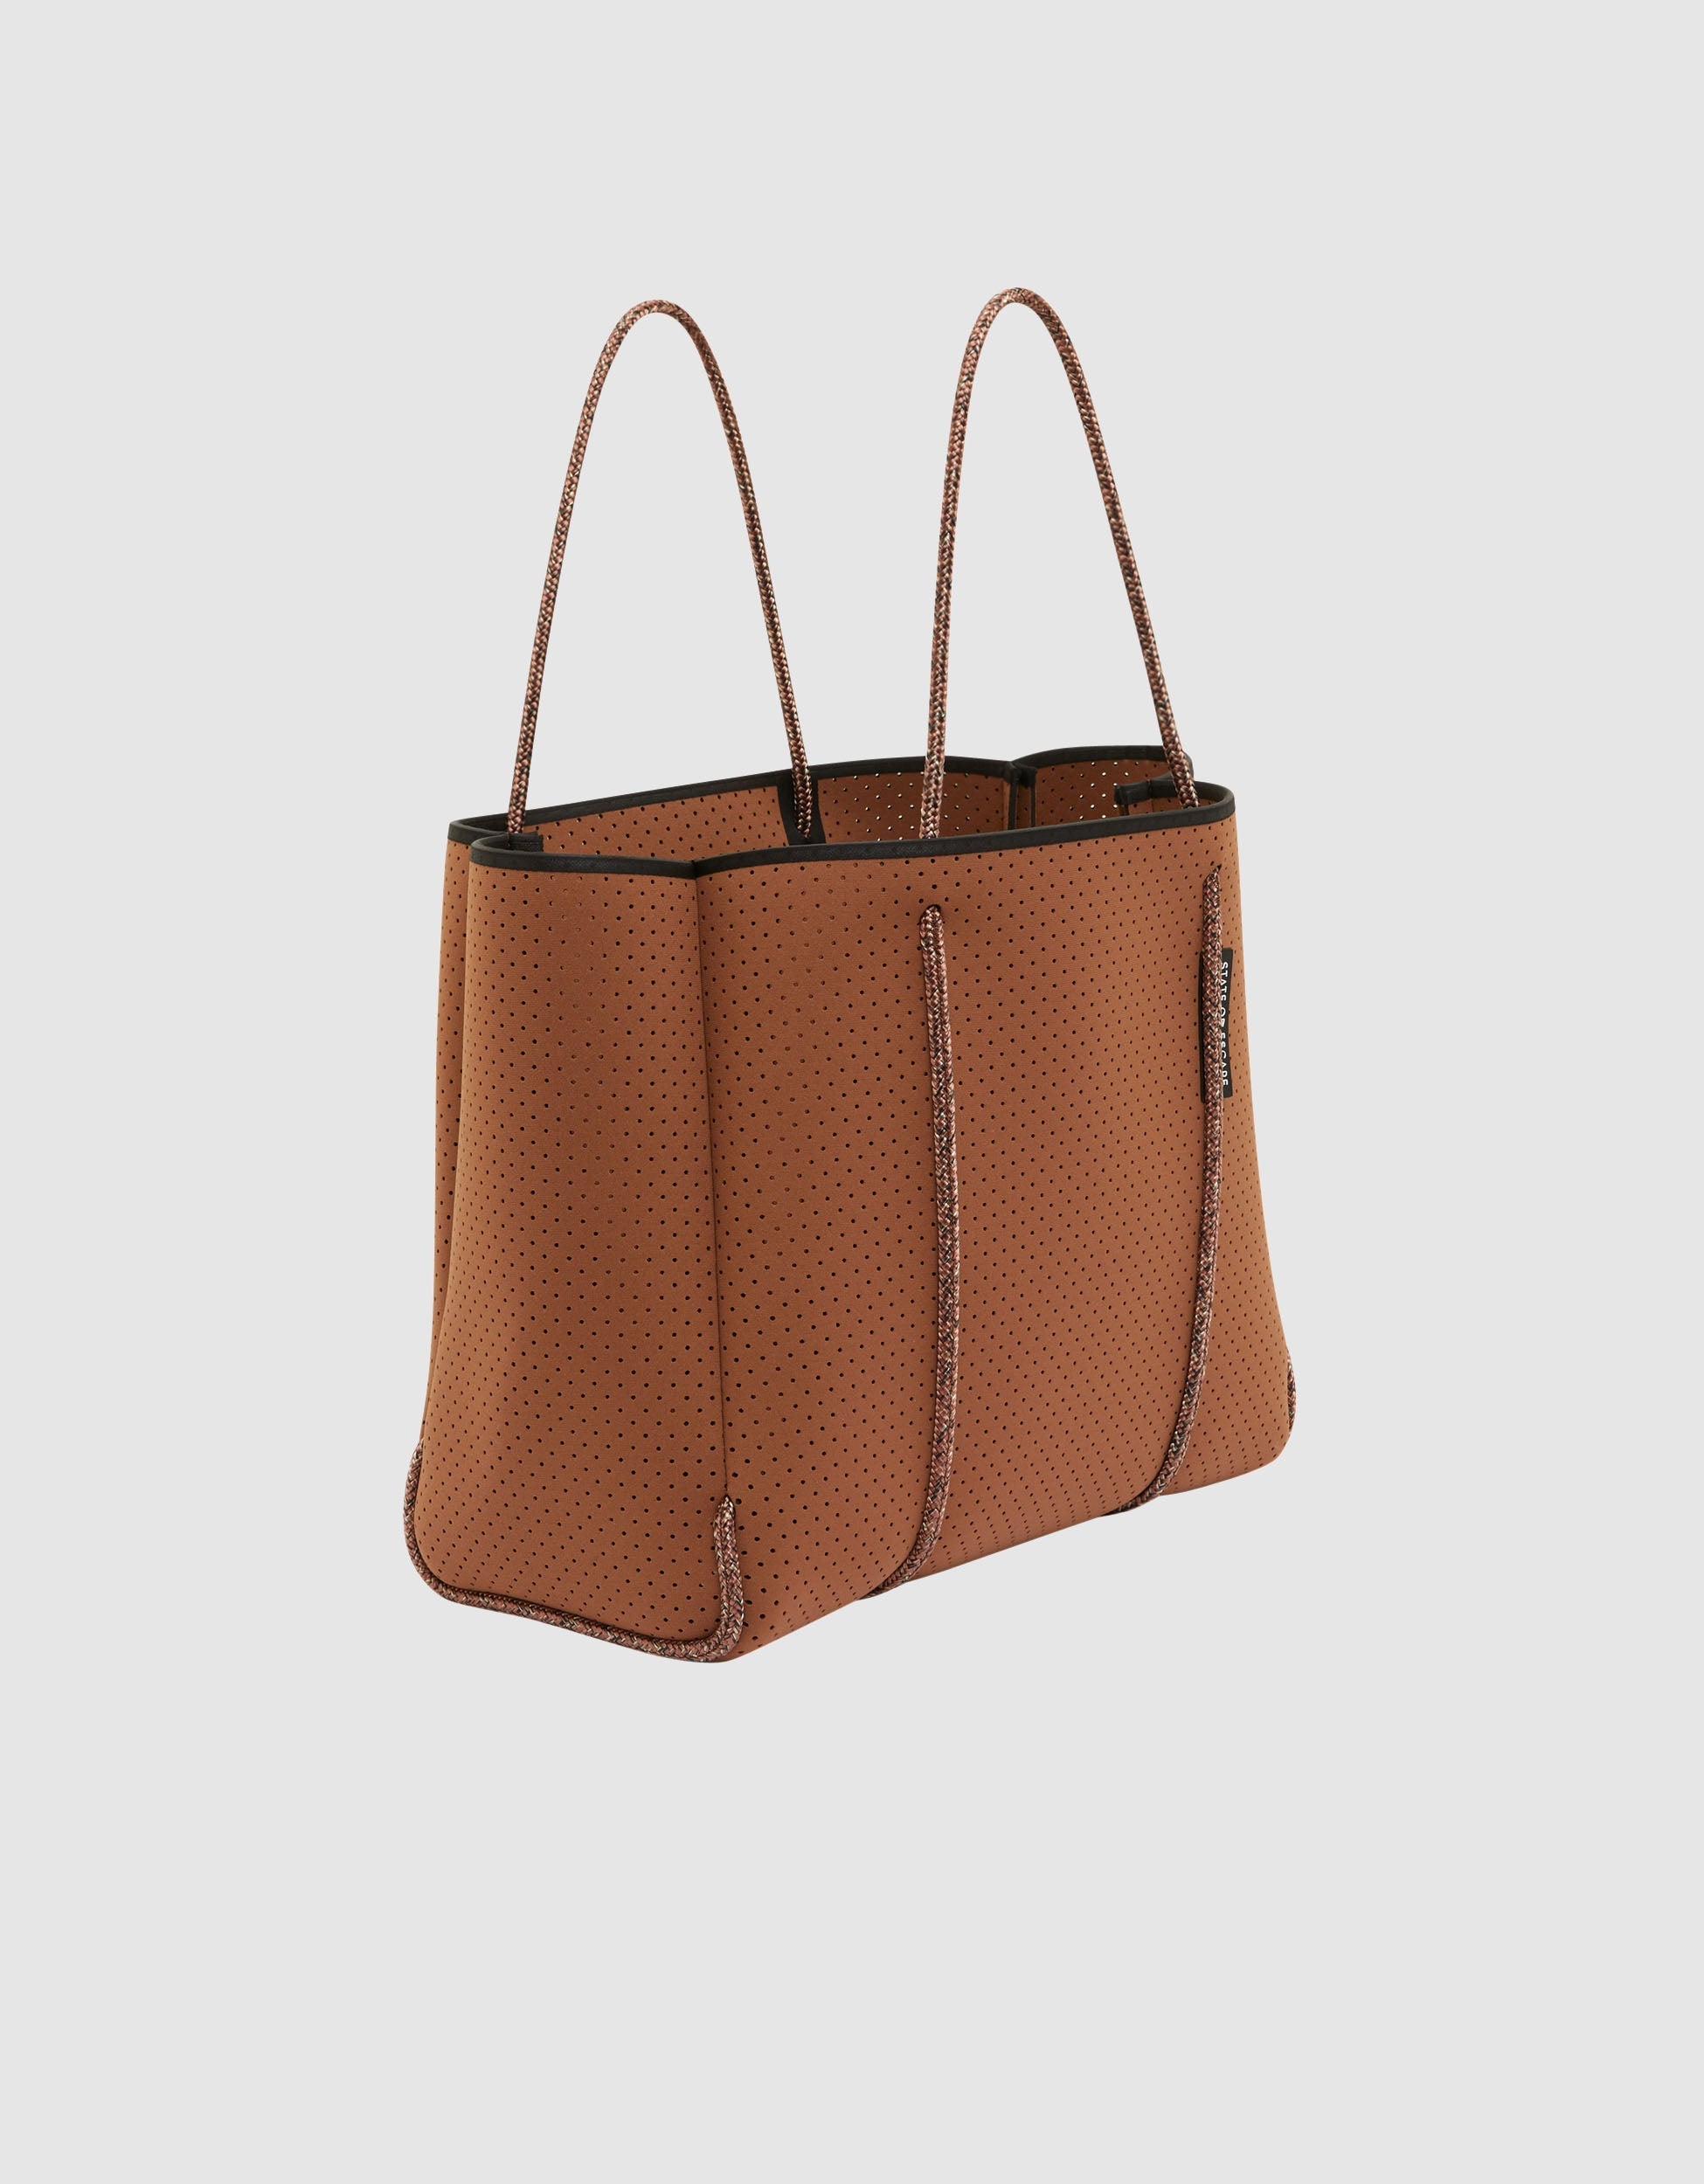 Flying Solo tote in saddle – State of Escape